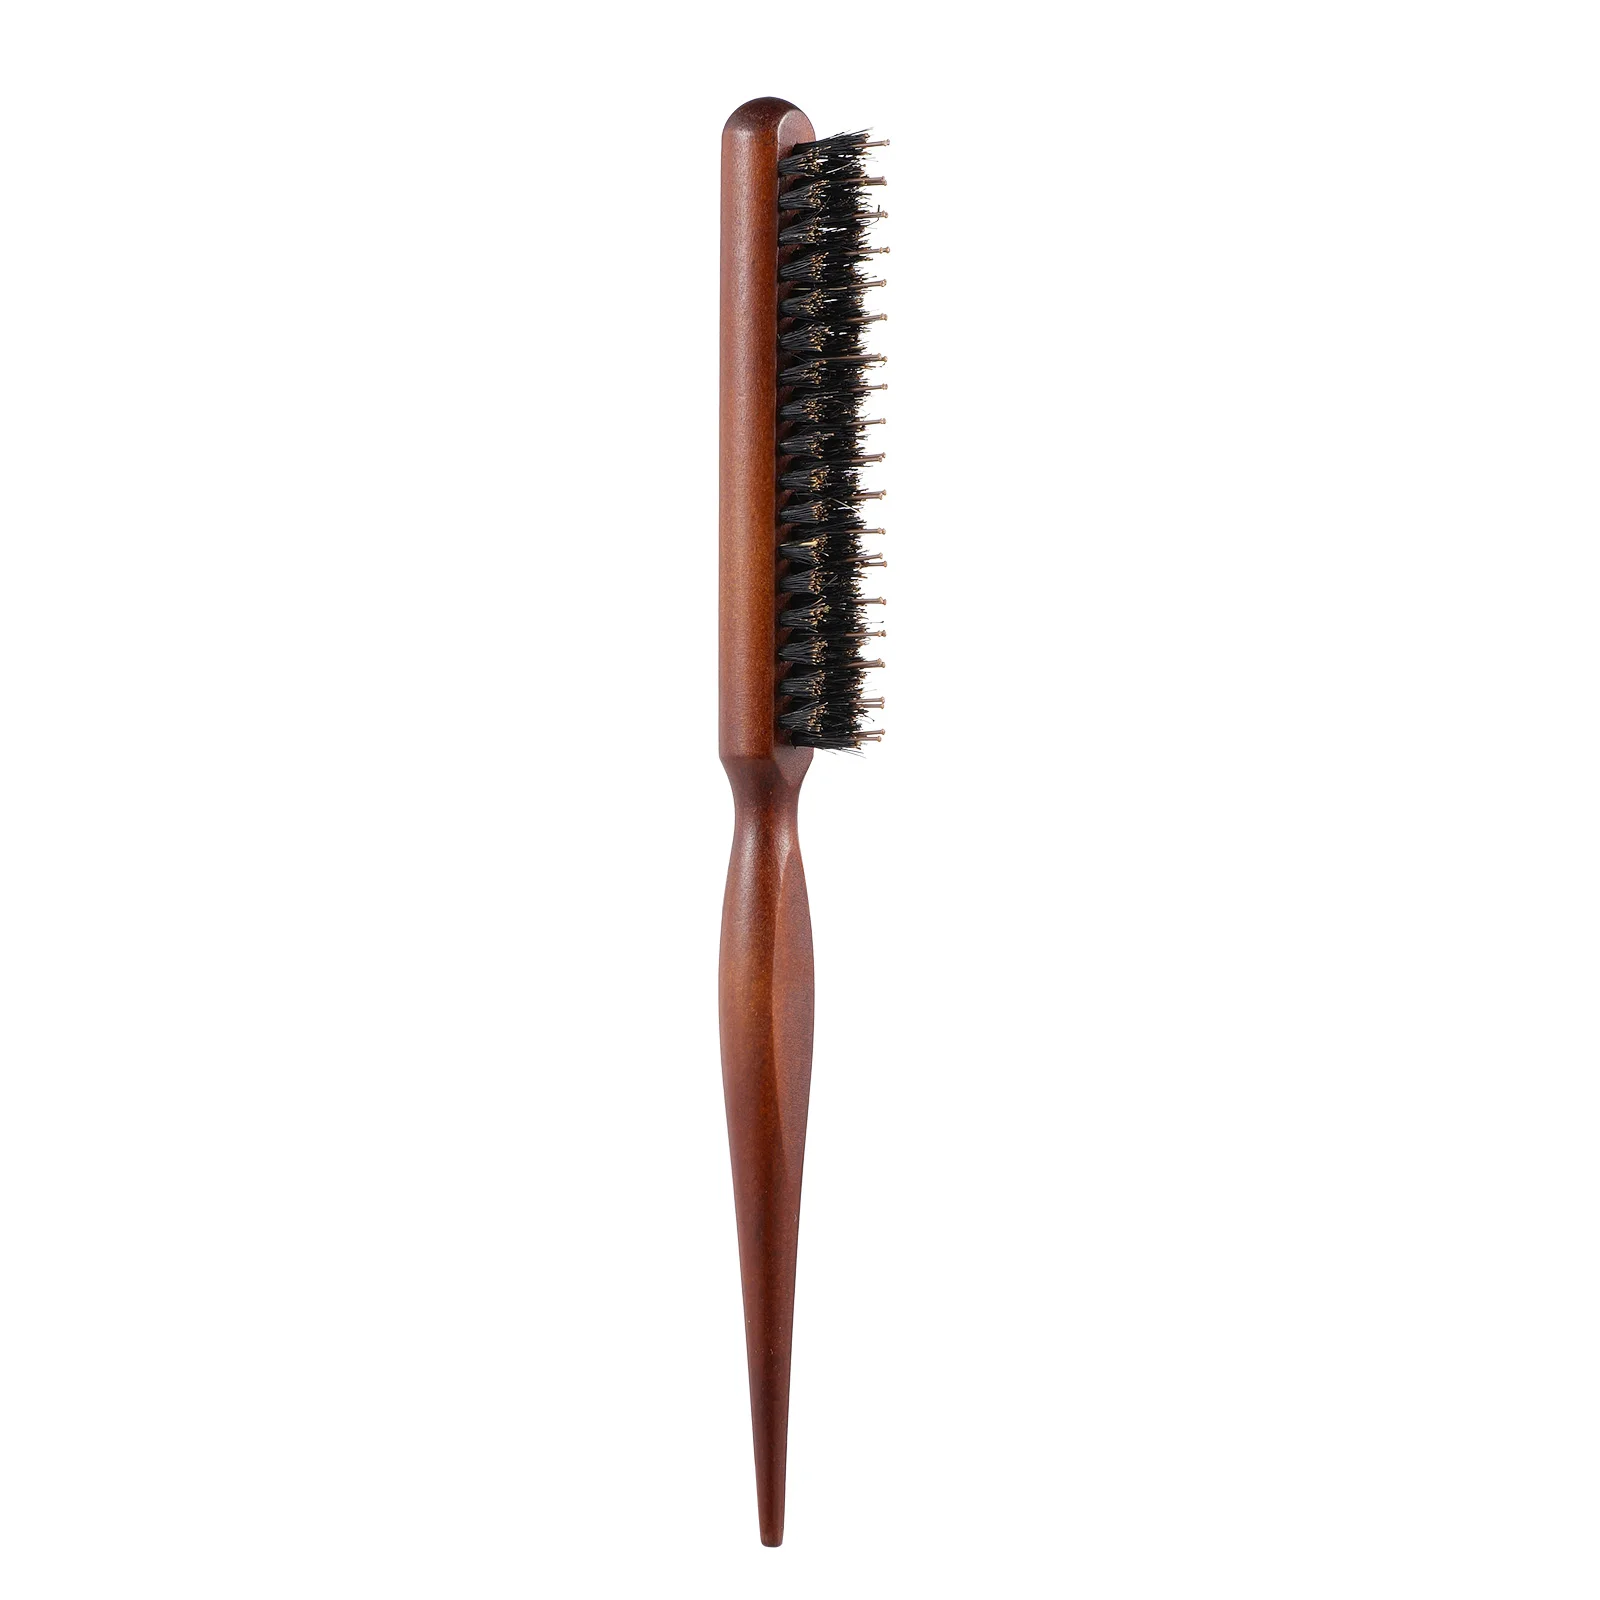 

1pc Hair Styling Wooden Handle Barber Hairdressing Comb Hair Brush Bristles Comb for Home Trip Travel Salon